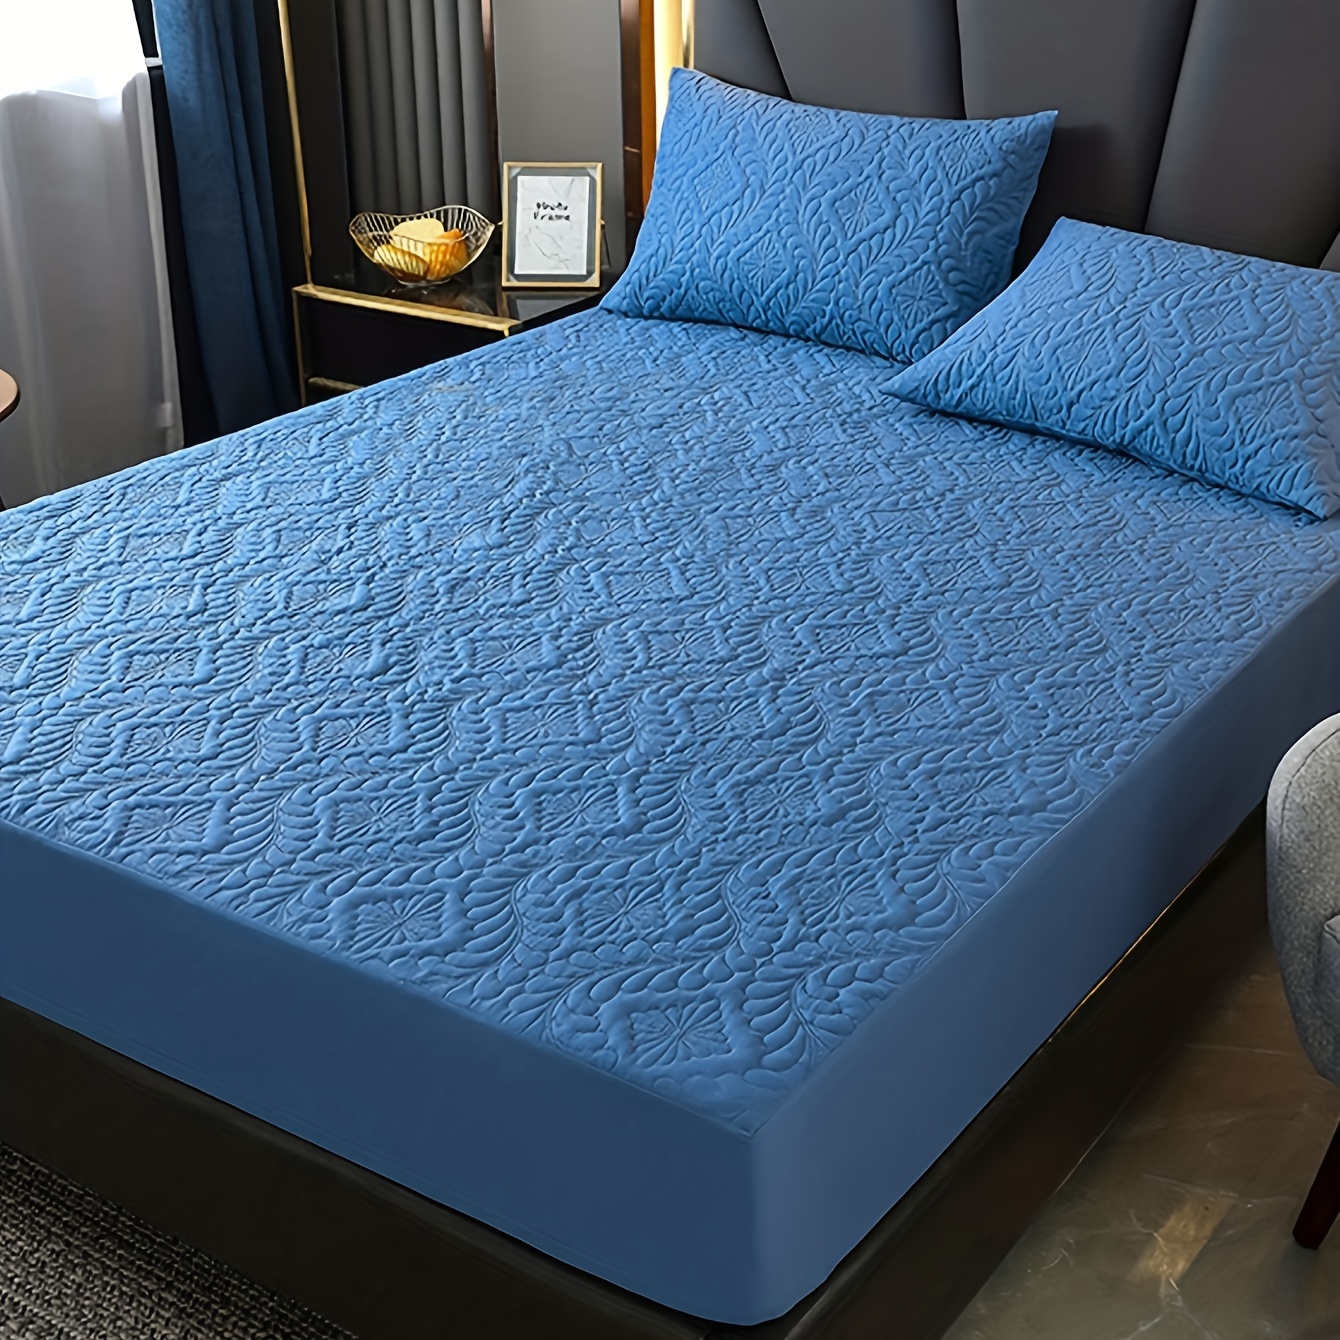 Waterproof Bed Cover Quilted Embossed Mattress Protector